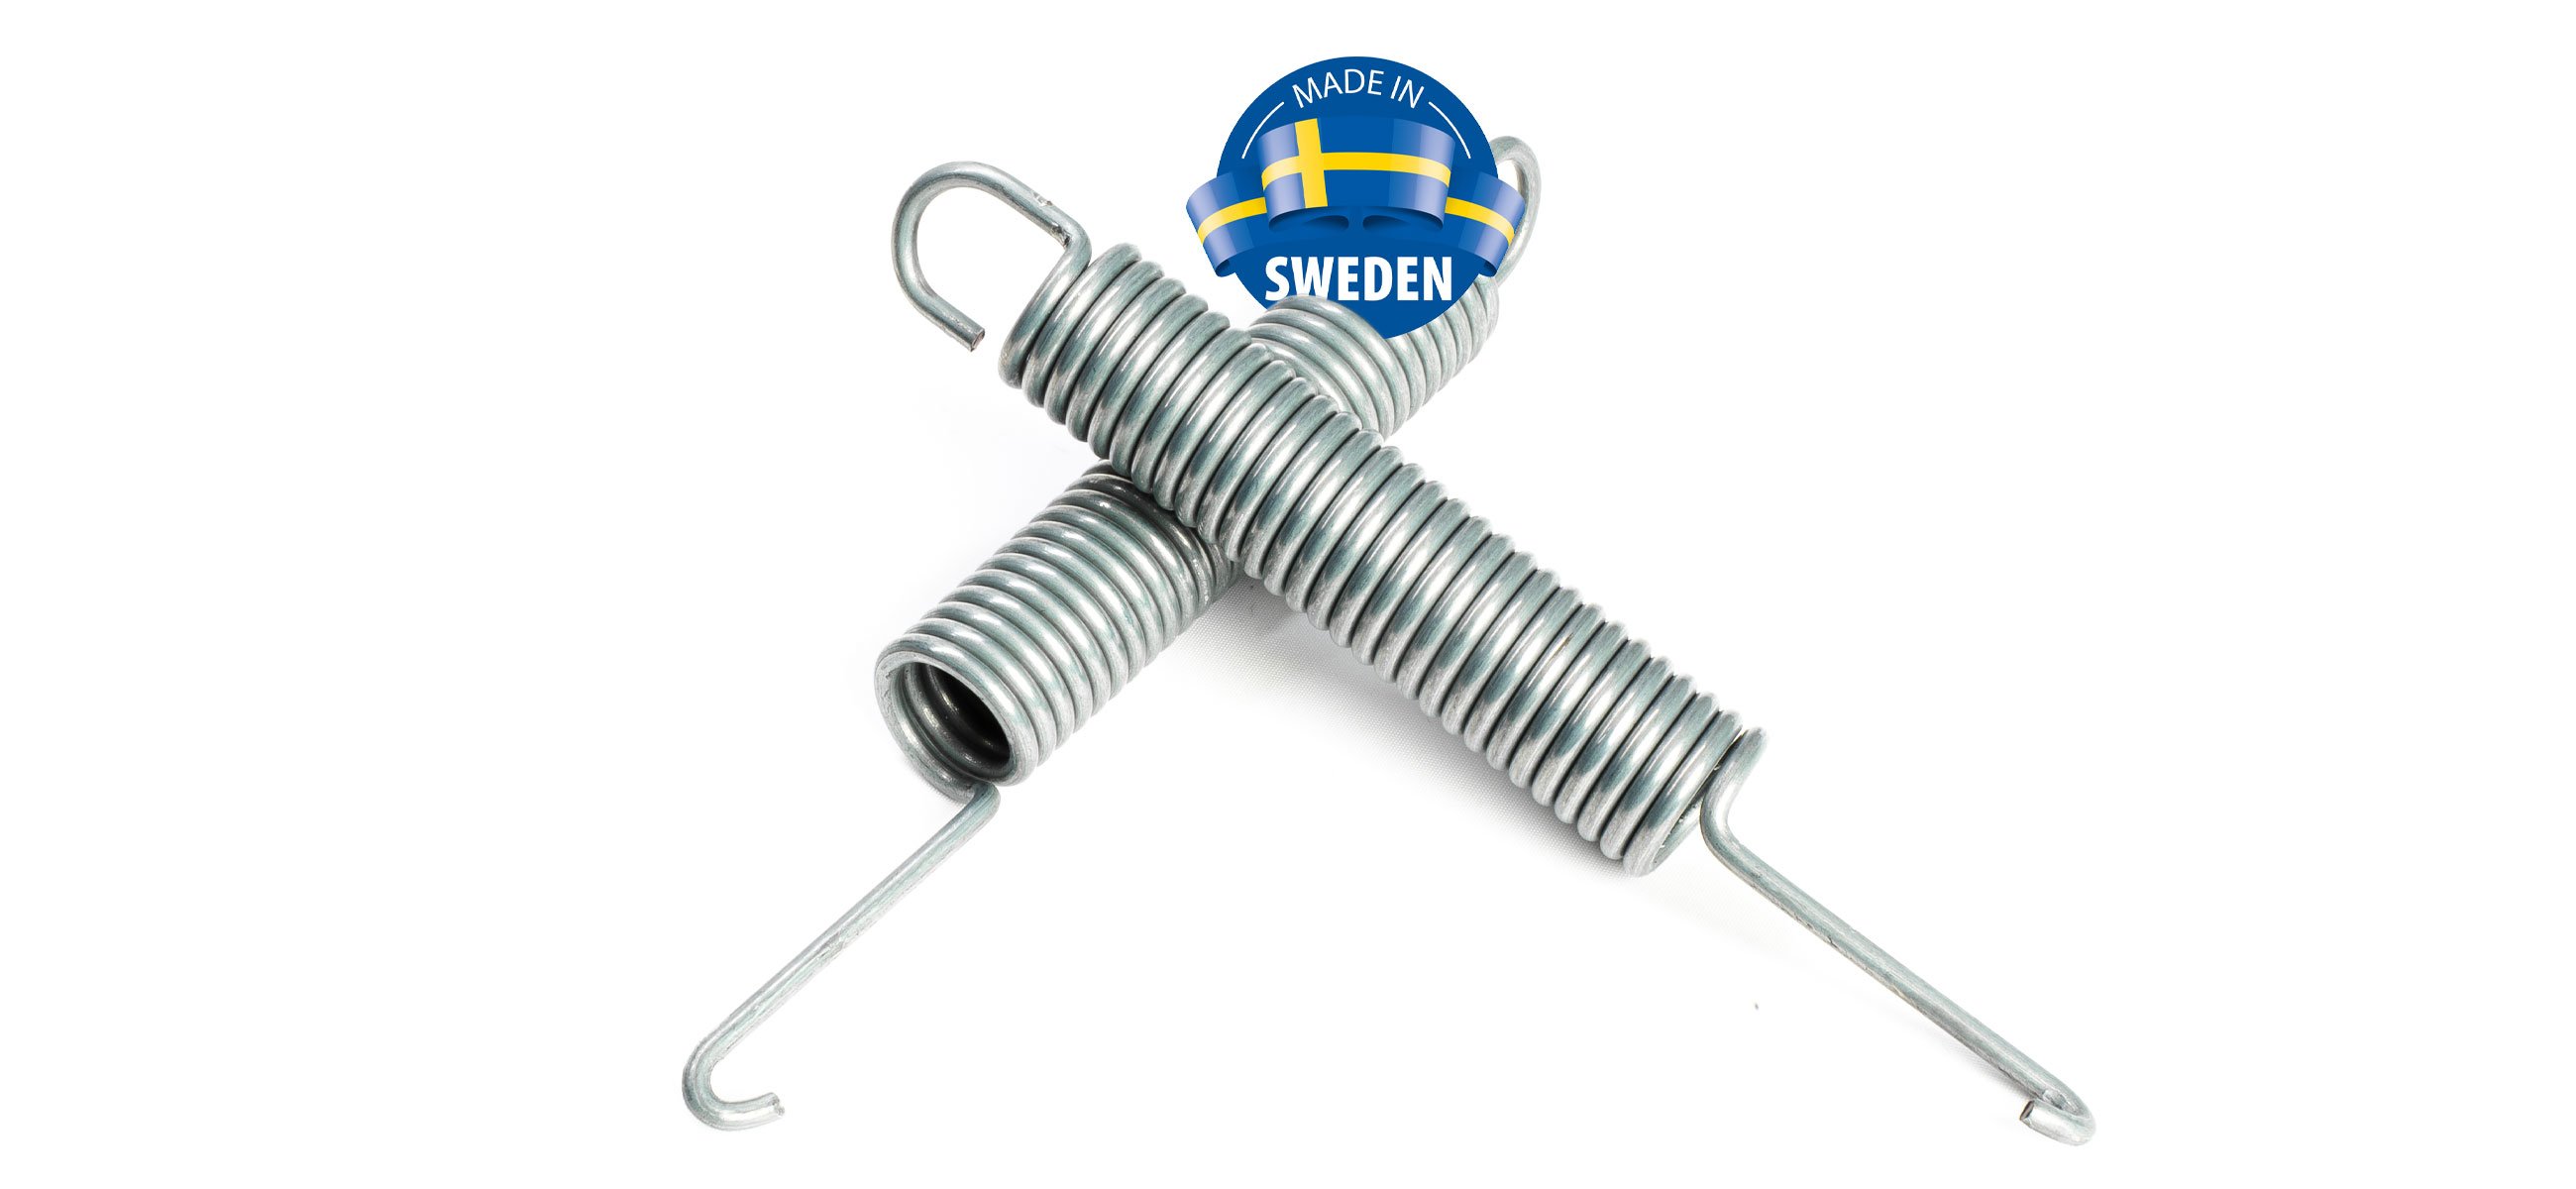 Made in Sweden, born free